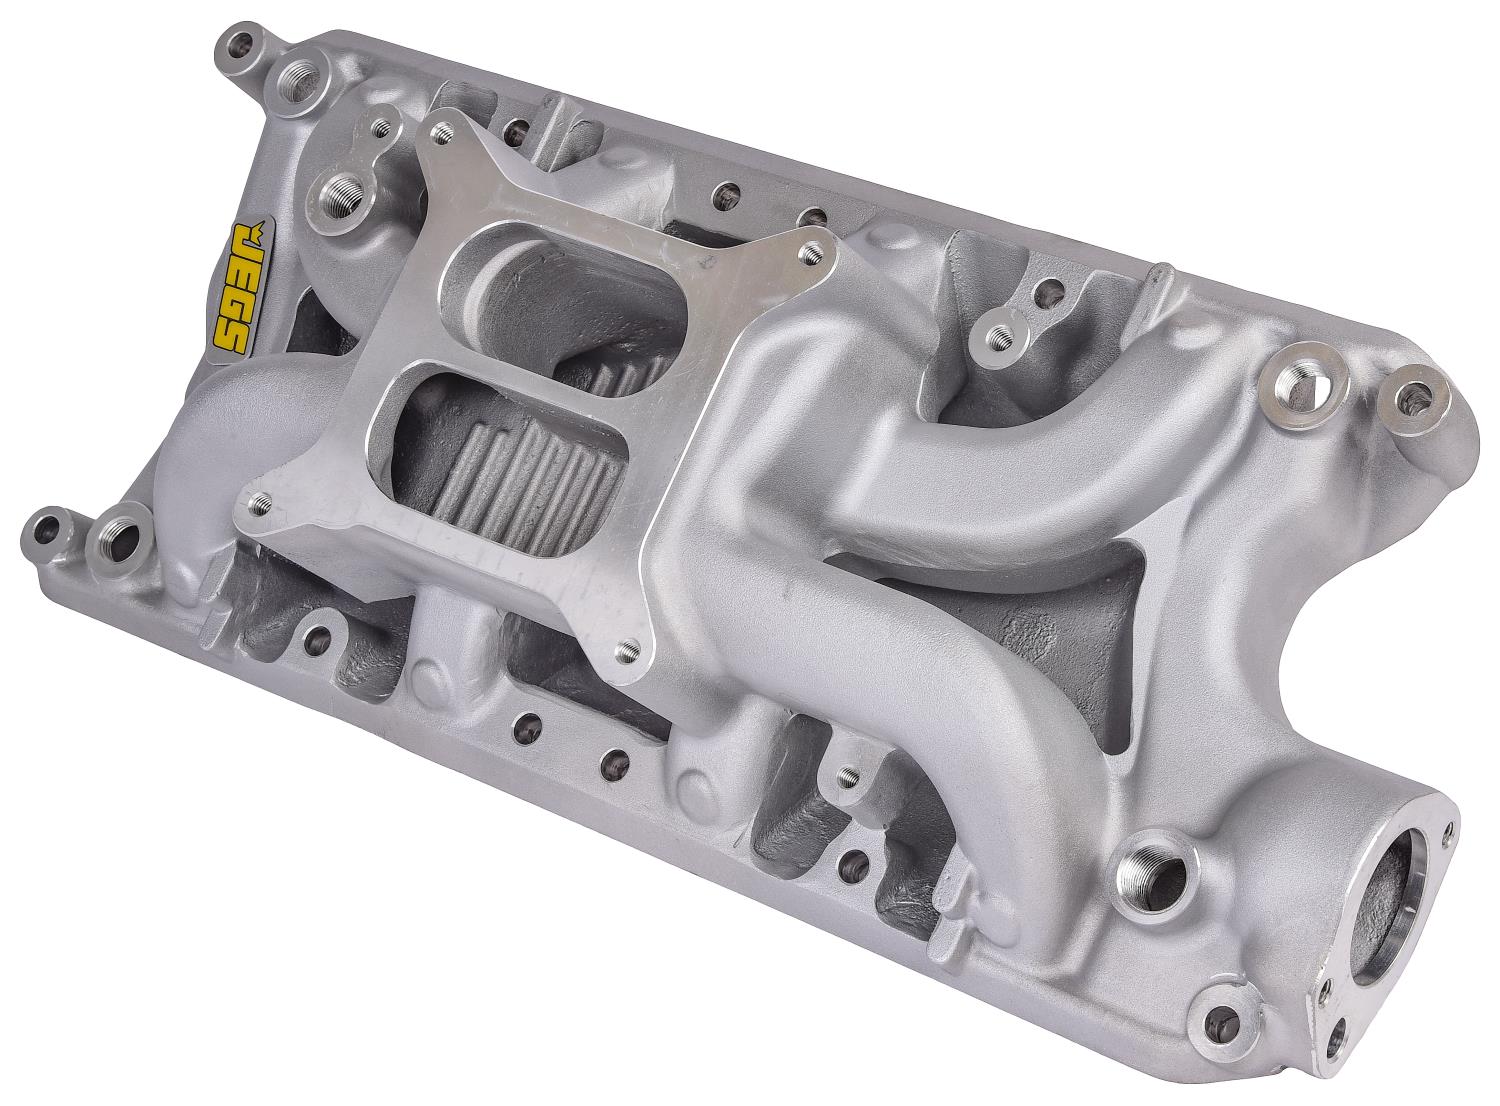 Cool Gap Intake Manifold for 1962-1985 Small Block Ford 260, 289 & 302 (Except Boss 302), Dual Plane [Satin]